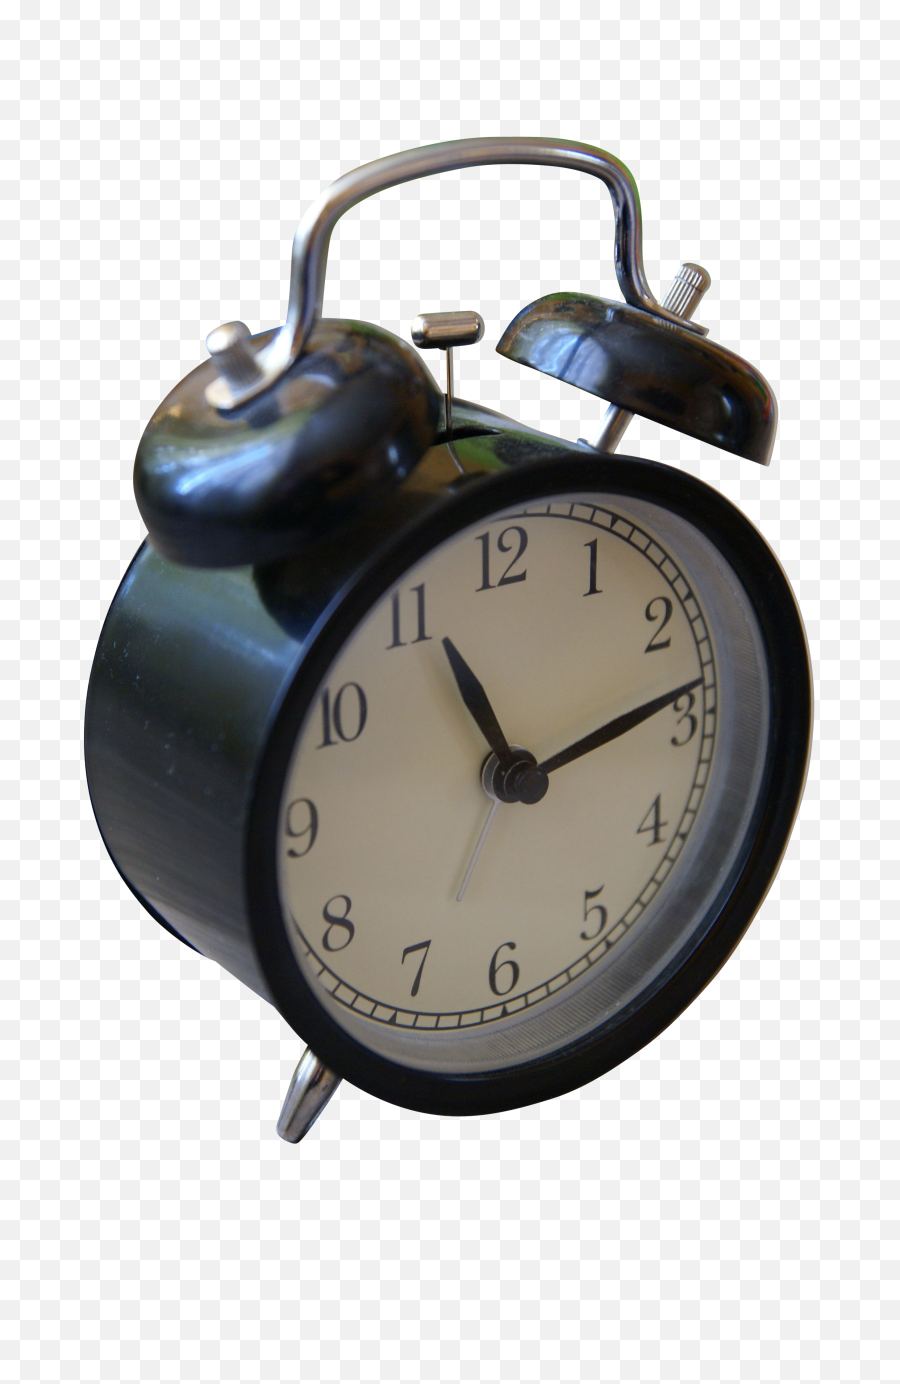 Black Table Clock Png Image - Purepng Free Transparent Cc0 Do Kids Wake Up Early On Weekends,Alarm Clock Transparent Background